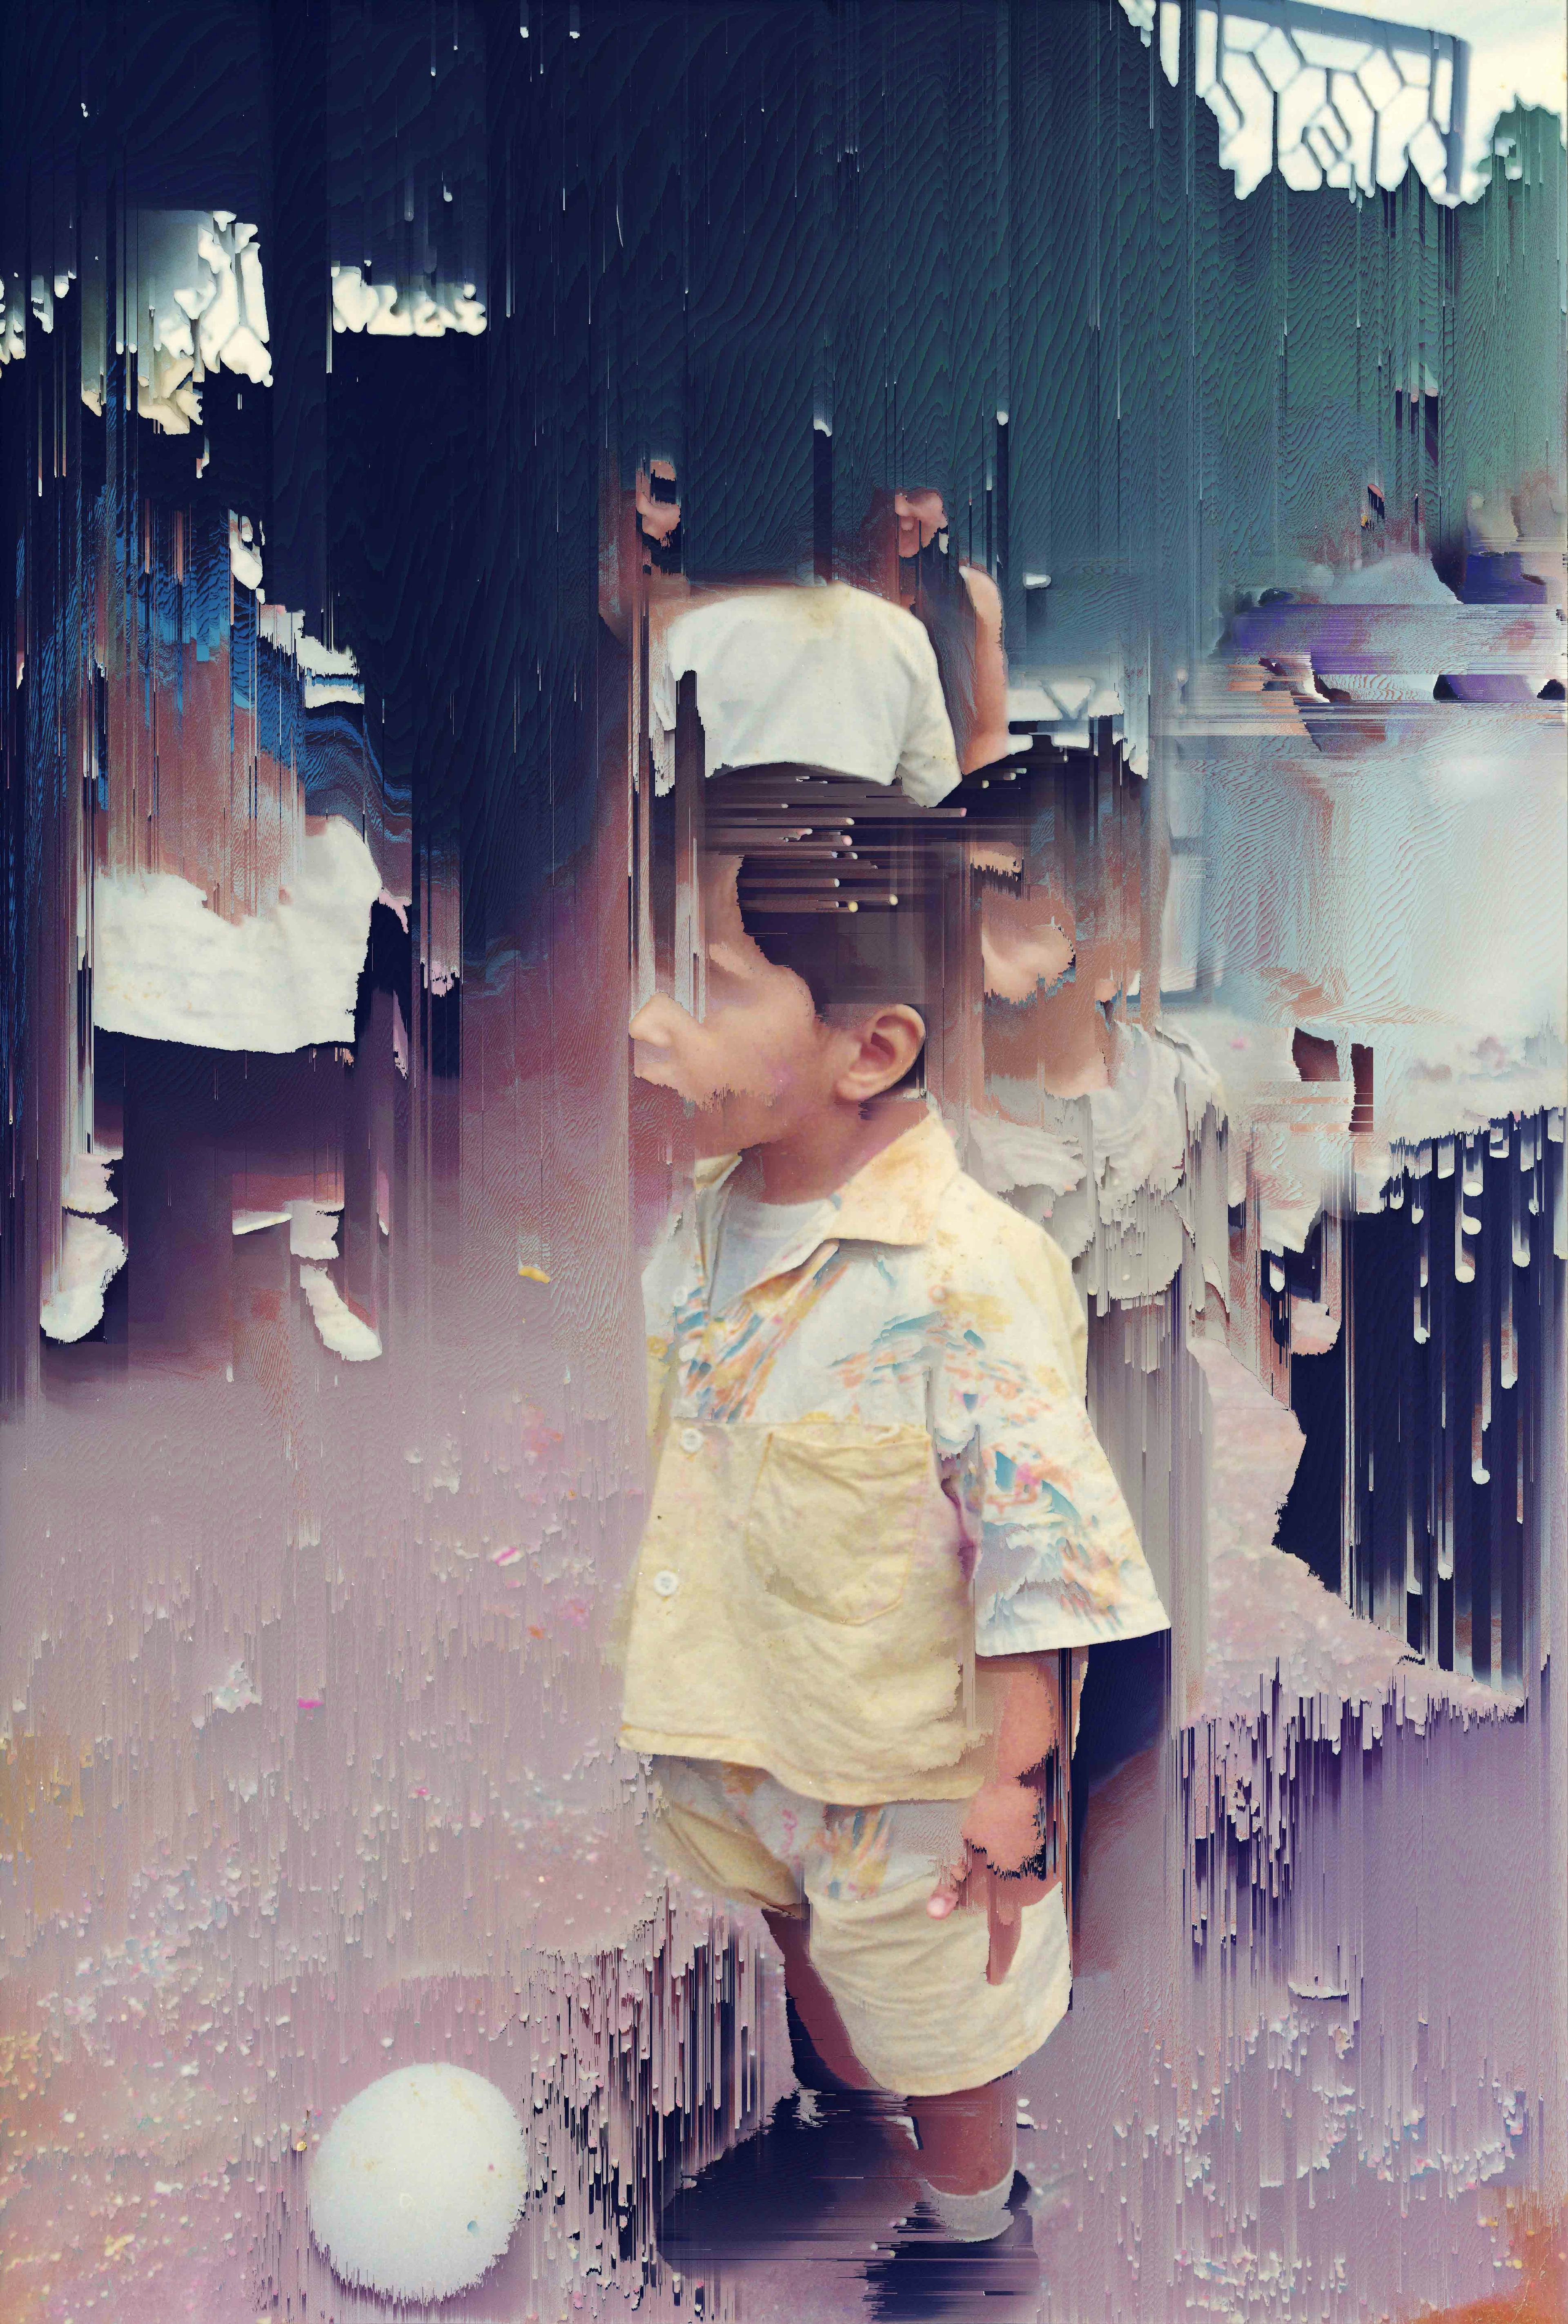 Archival photo of a small child on the street, a balloon-shaped object at his feet. The pixels are manipulated and wipe out the surrounding people.© Cristóbal Ascencio Ramos